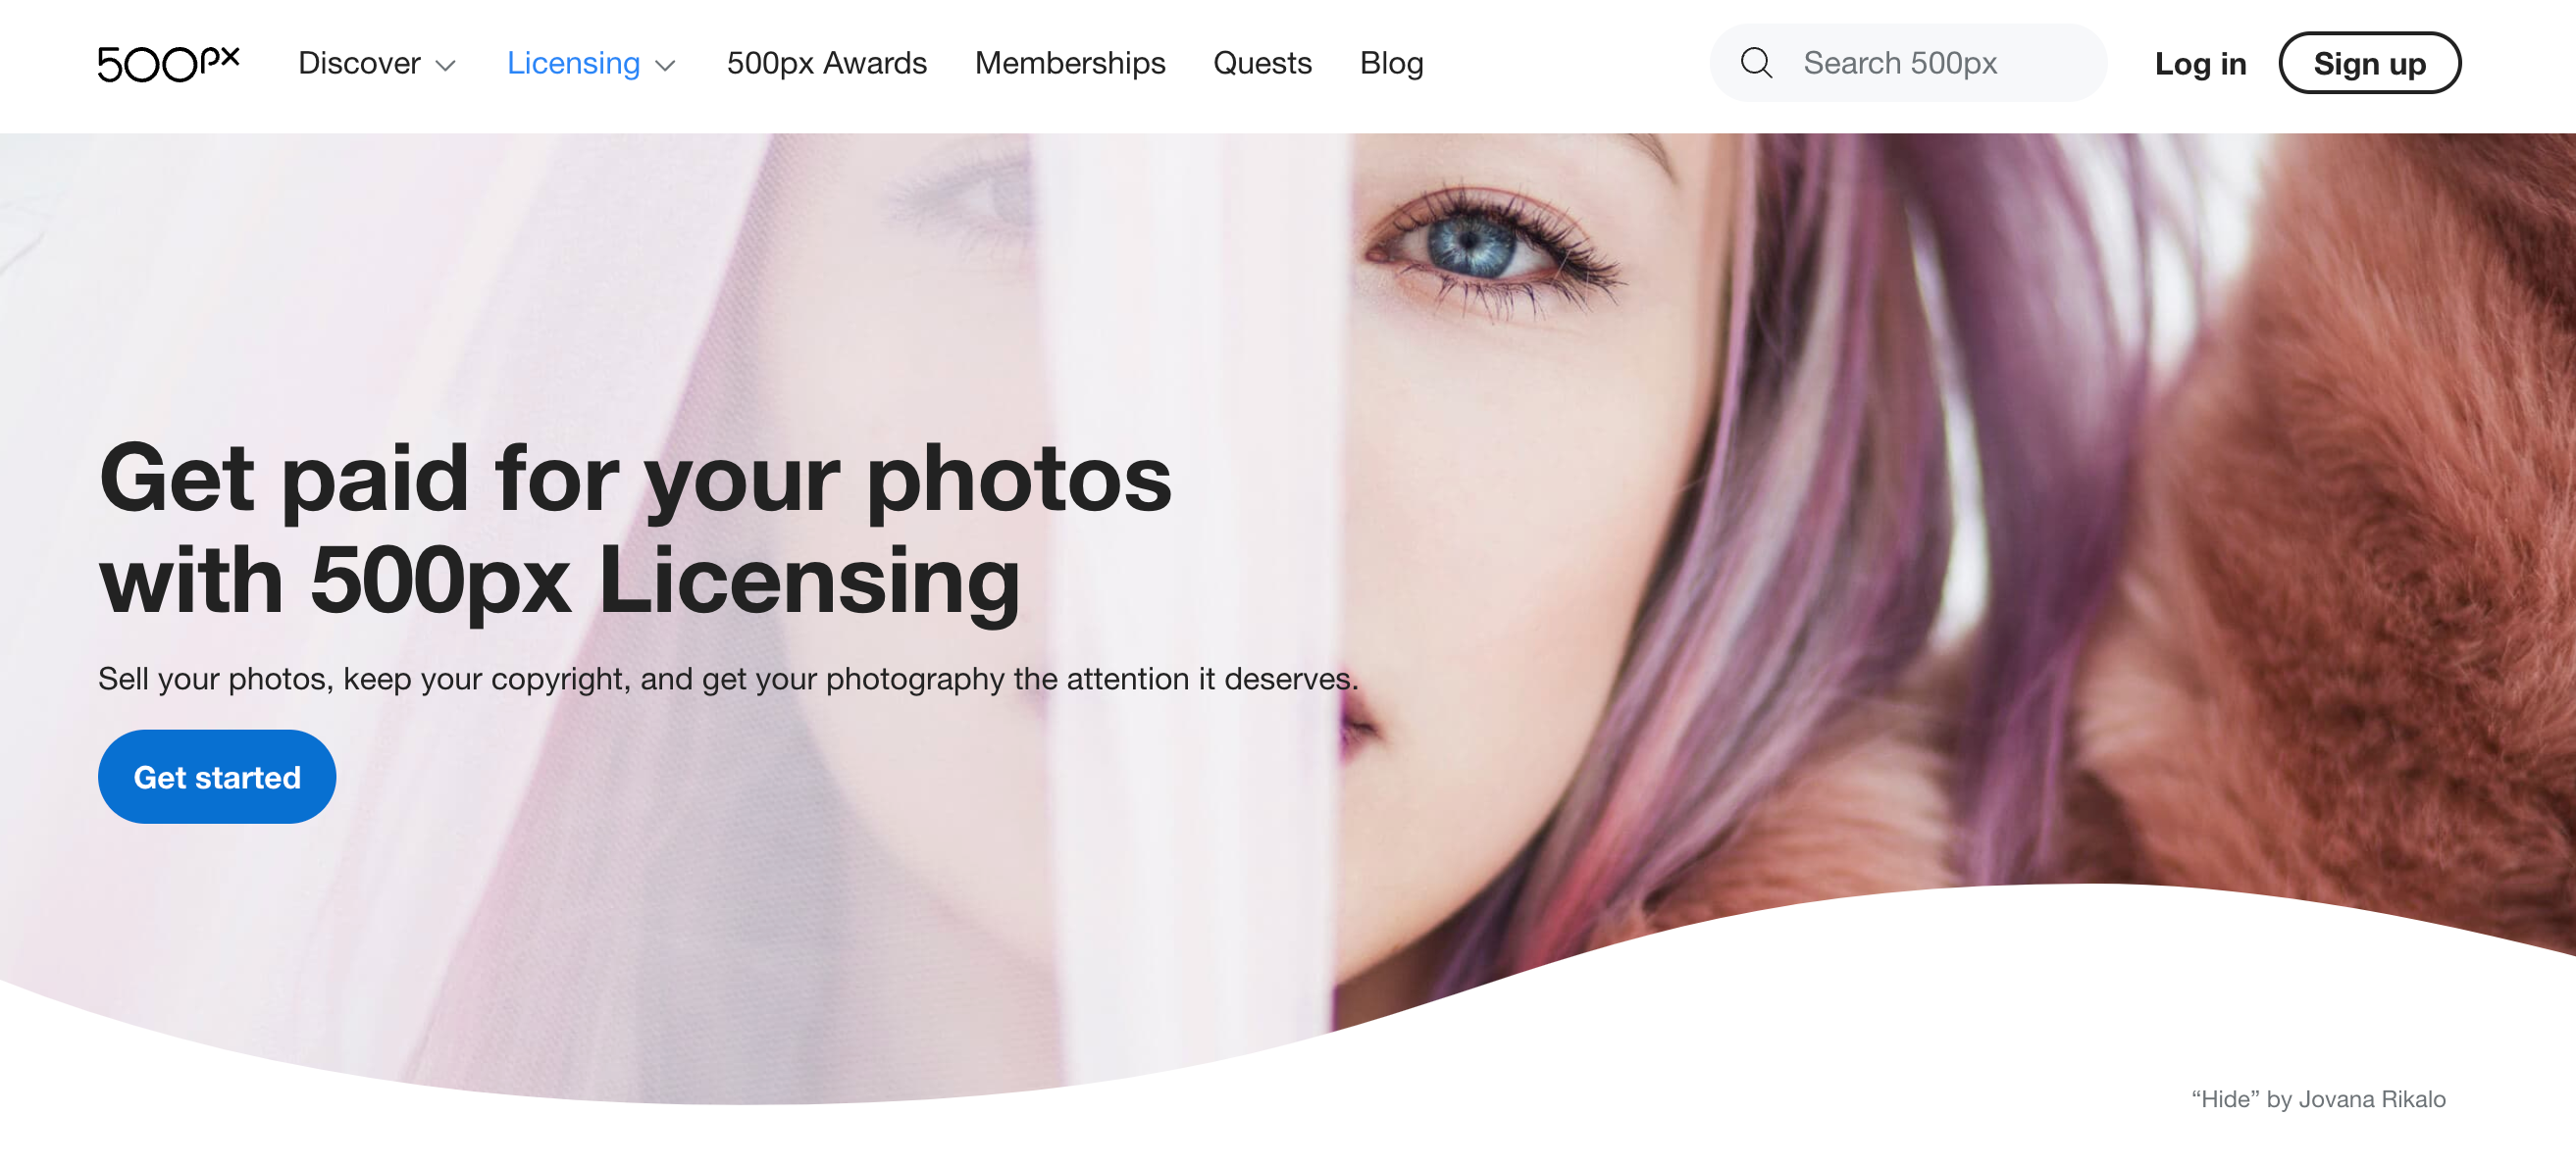 Screenshot of the 500px licensing page, featuring the photograph "Hide" by Jovana Rikalo